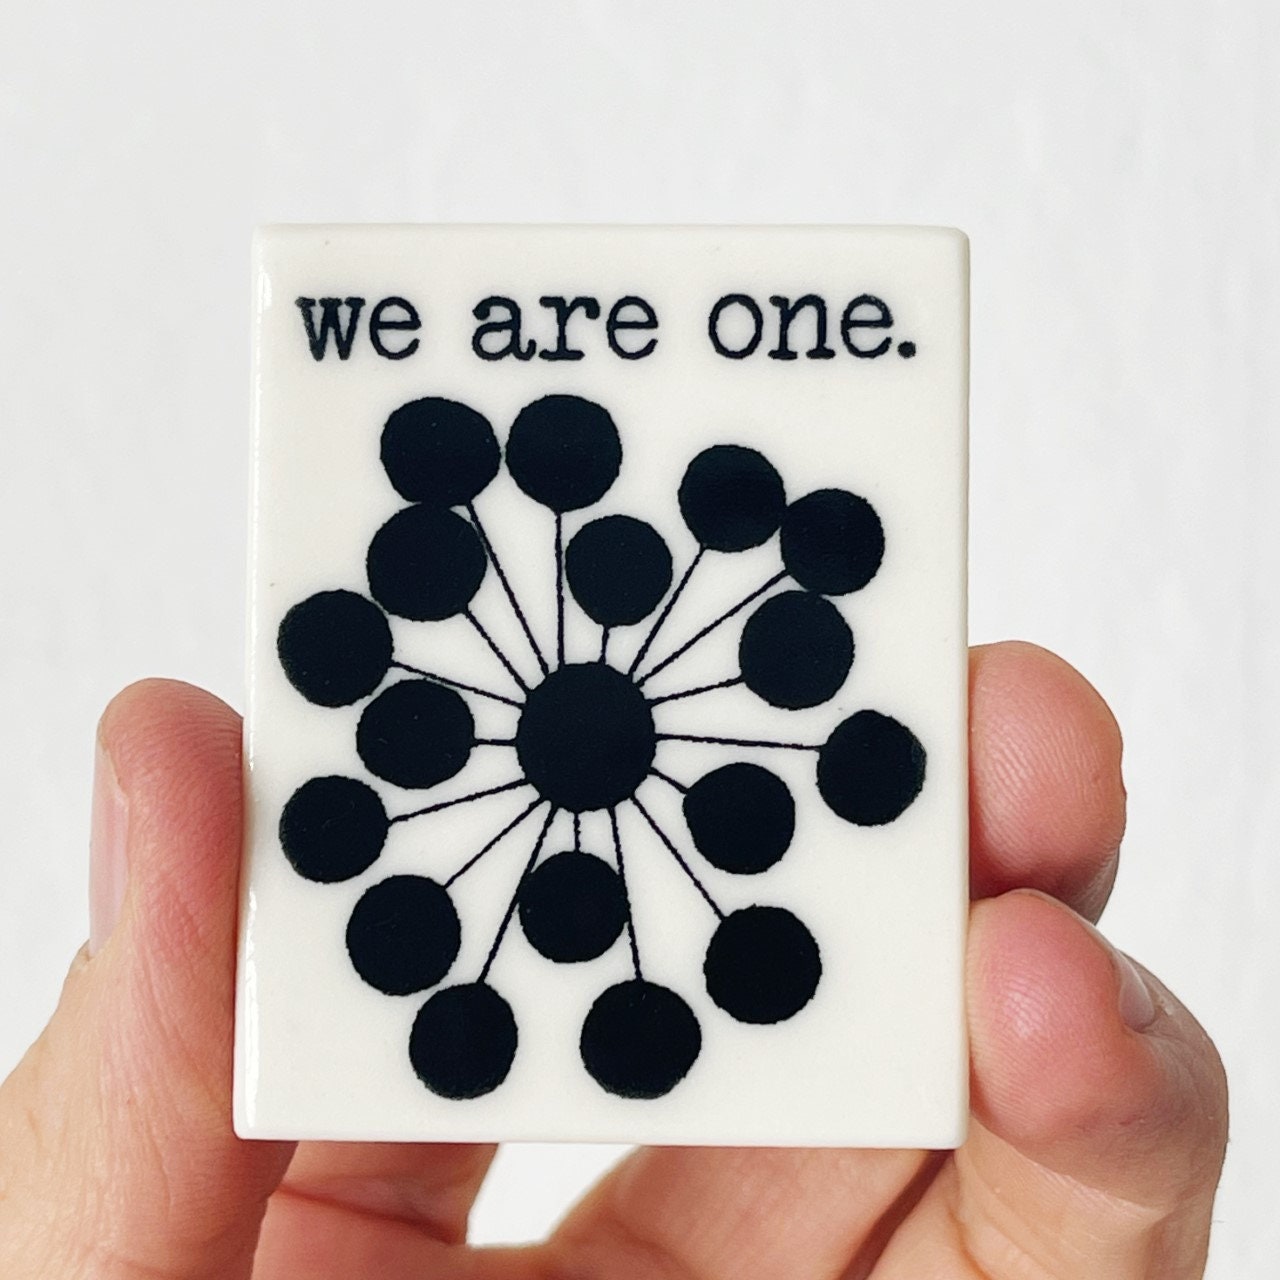 we are one | ceramic magnet | love quote | love quotes | screenprinted ceramics | fridge magnet | daily reminder | hand drawn pattern